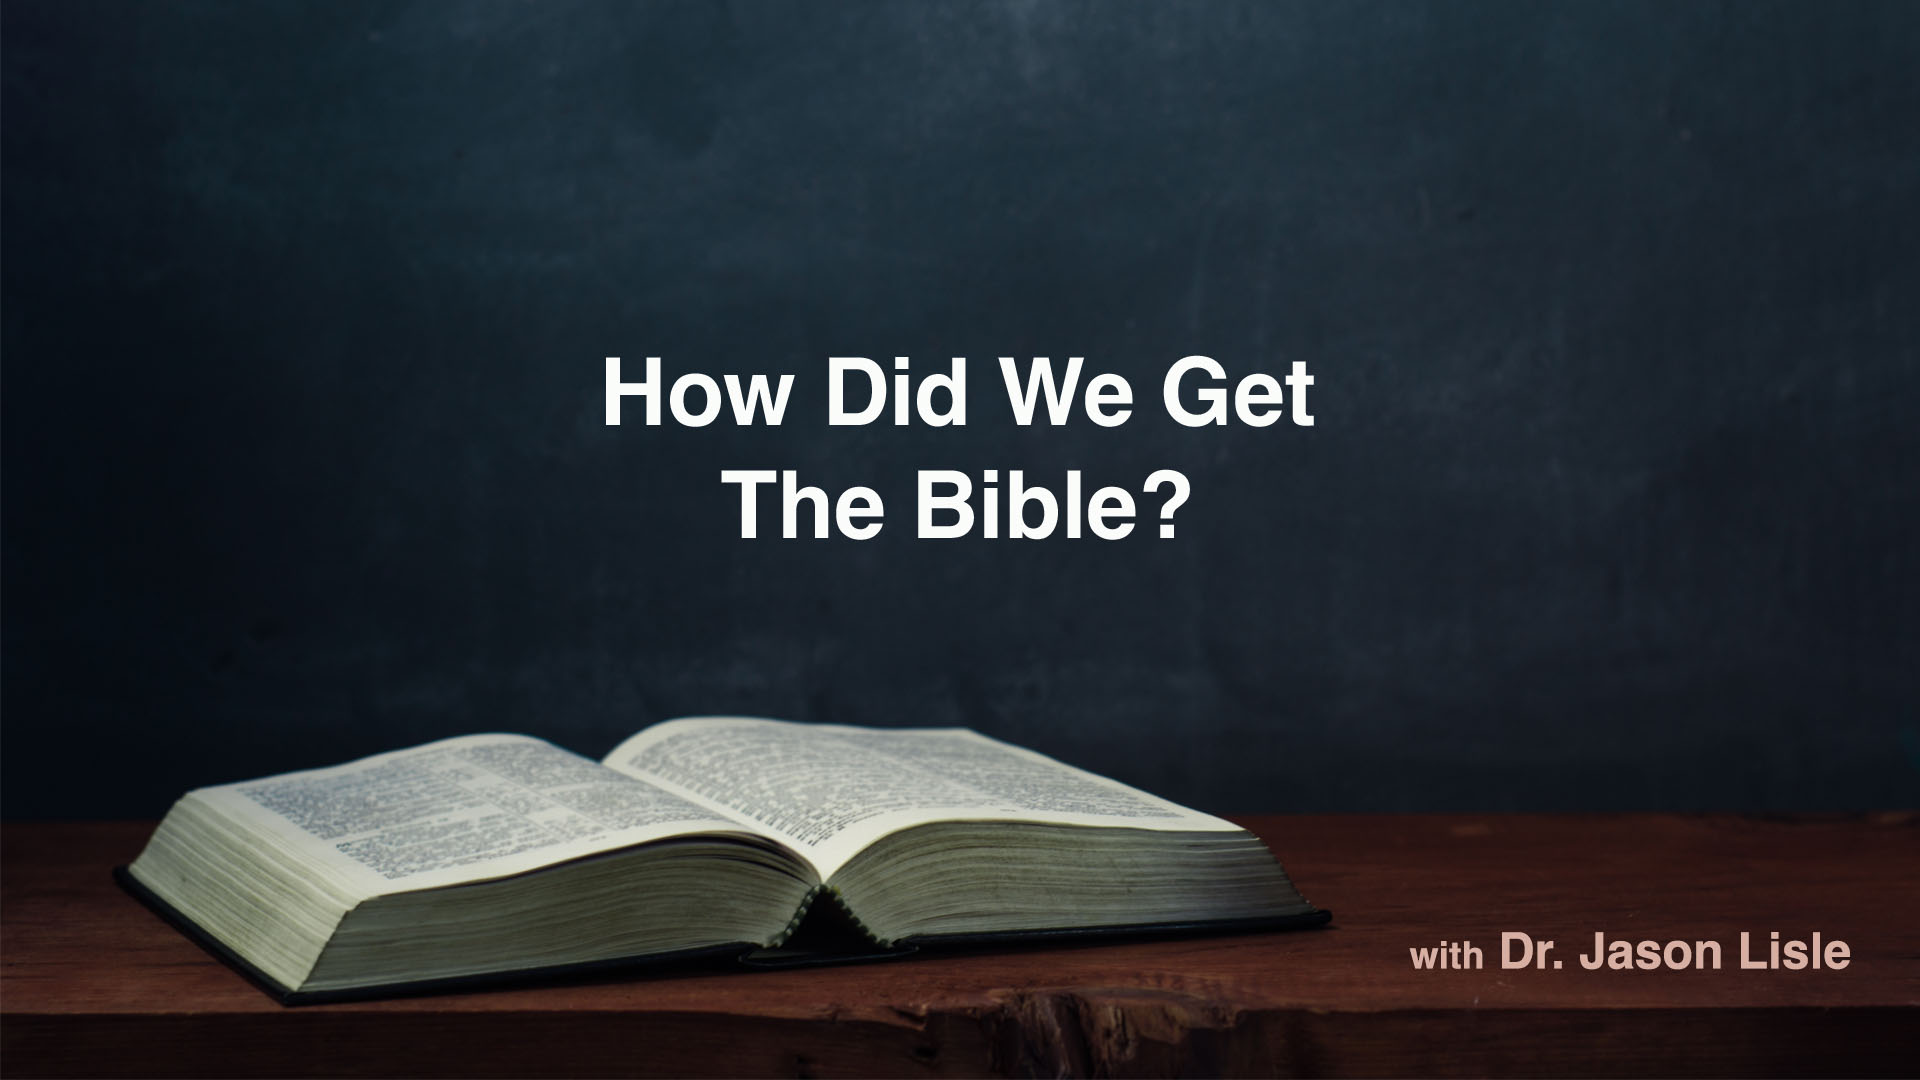 How Did We Get the Bible?